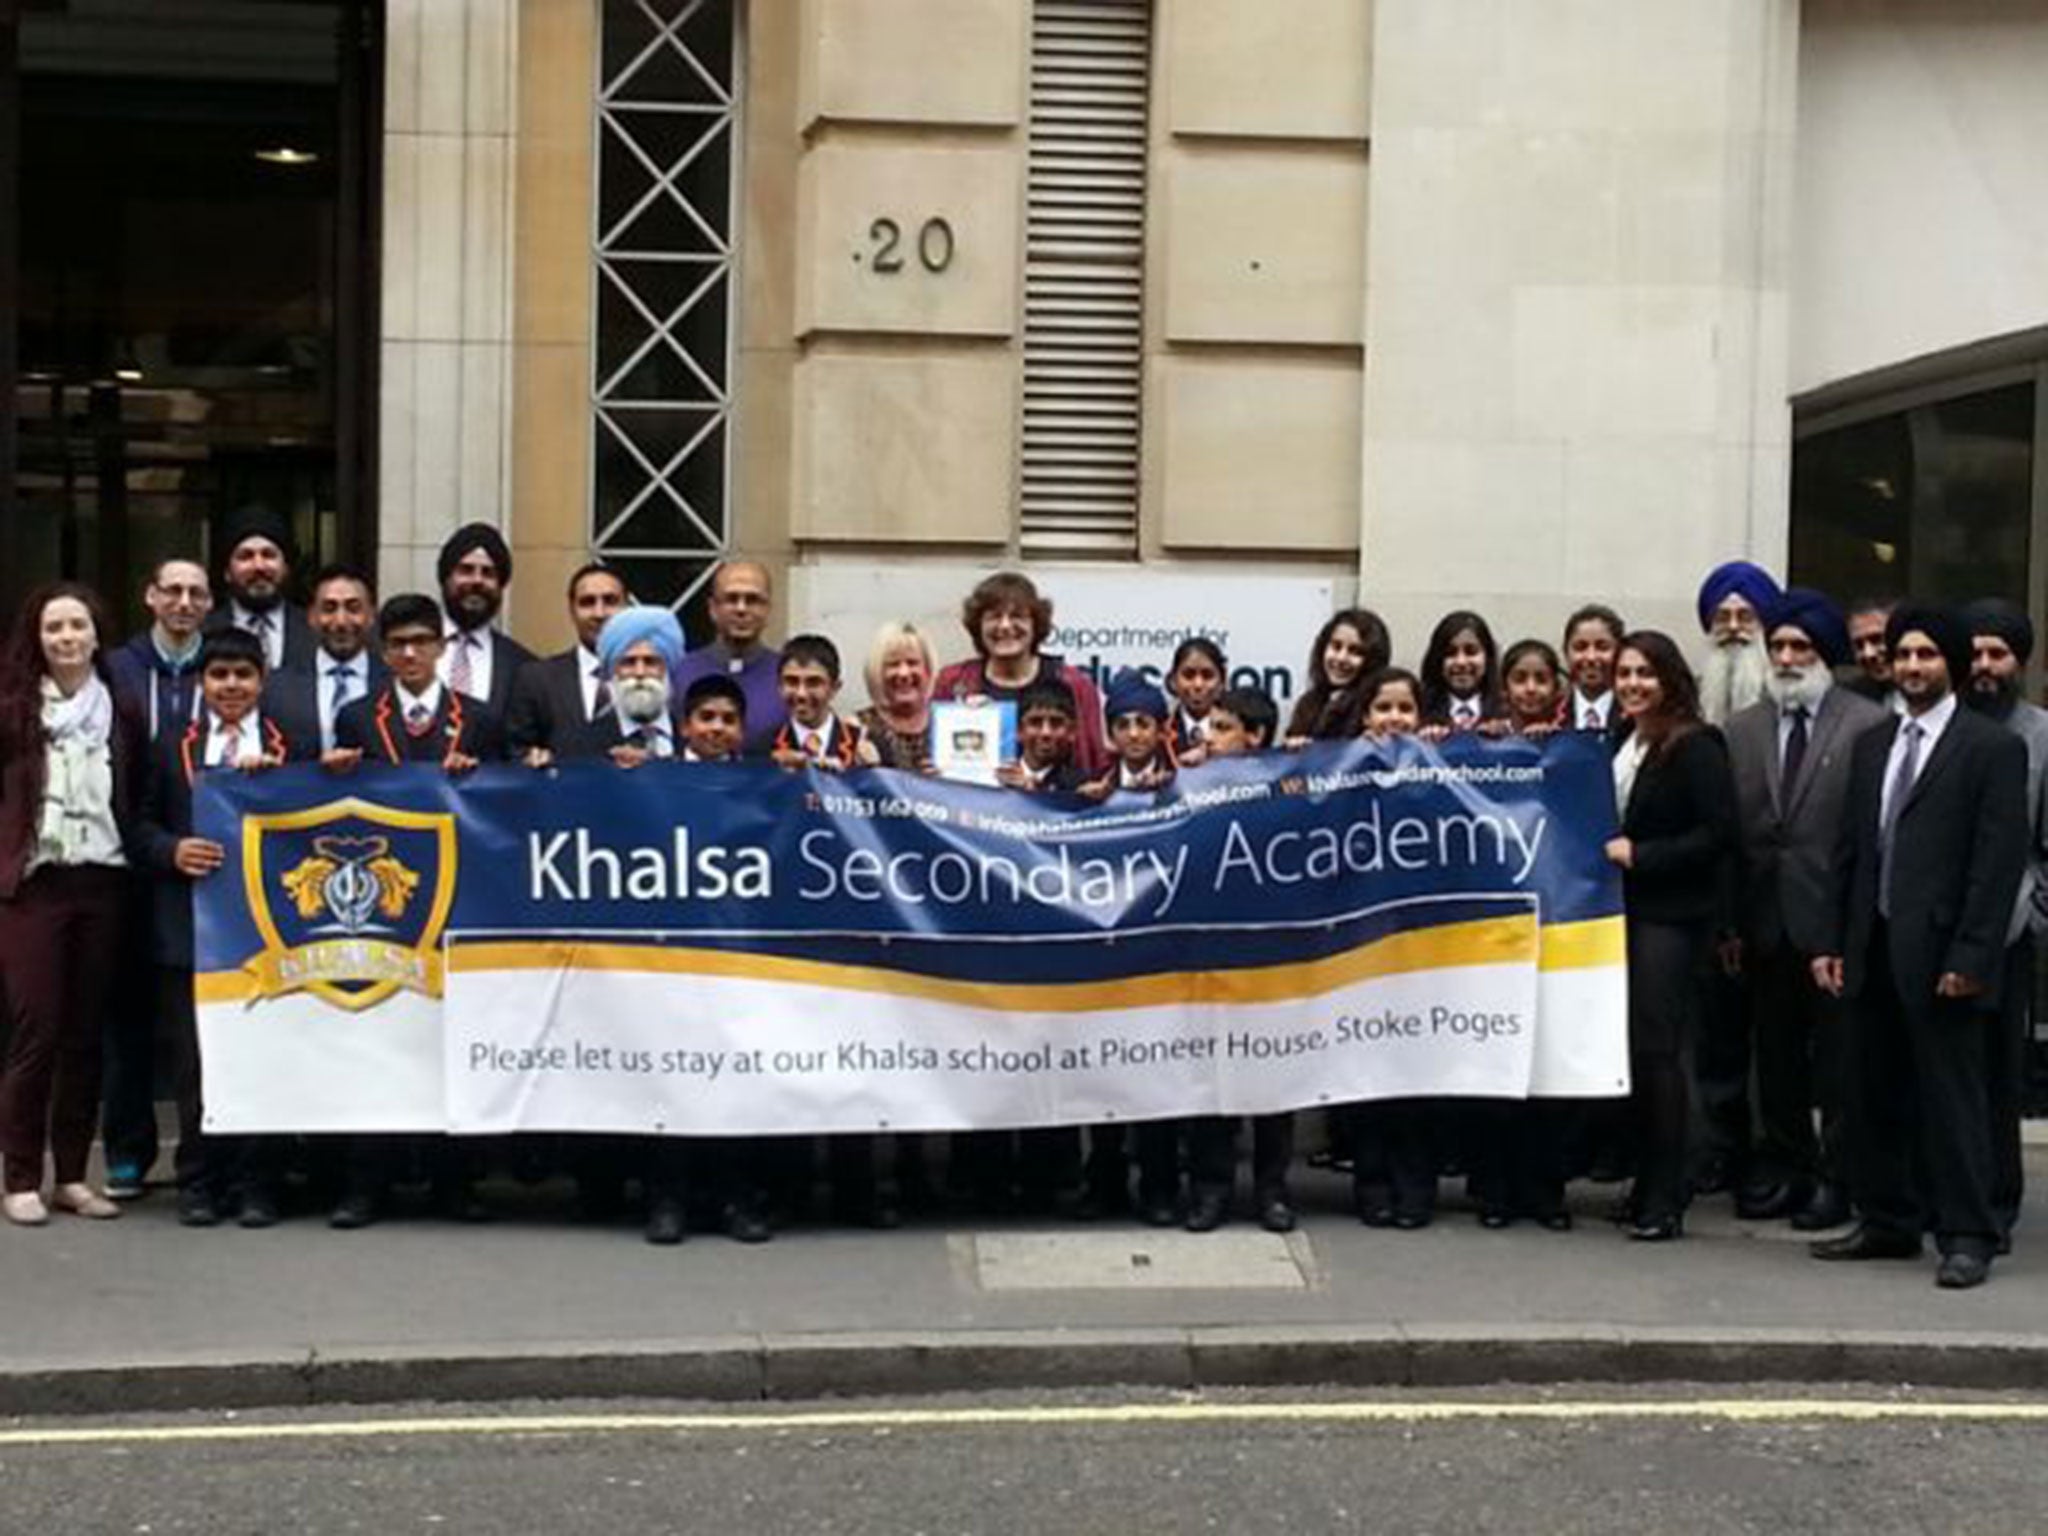 Khalsa staff and pupils campaign in support of their Stoke Poges school